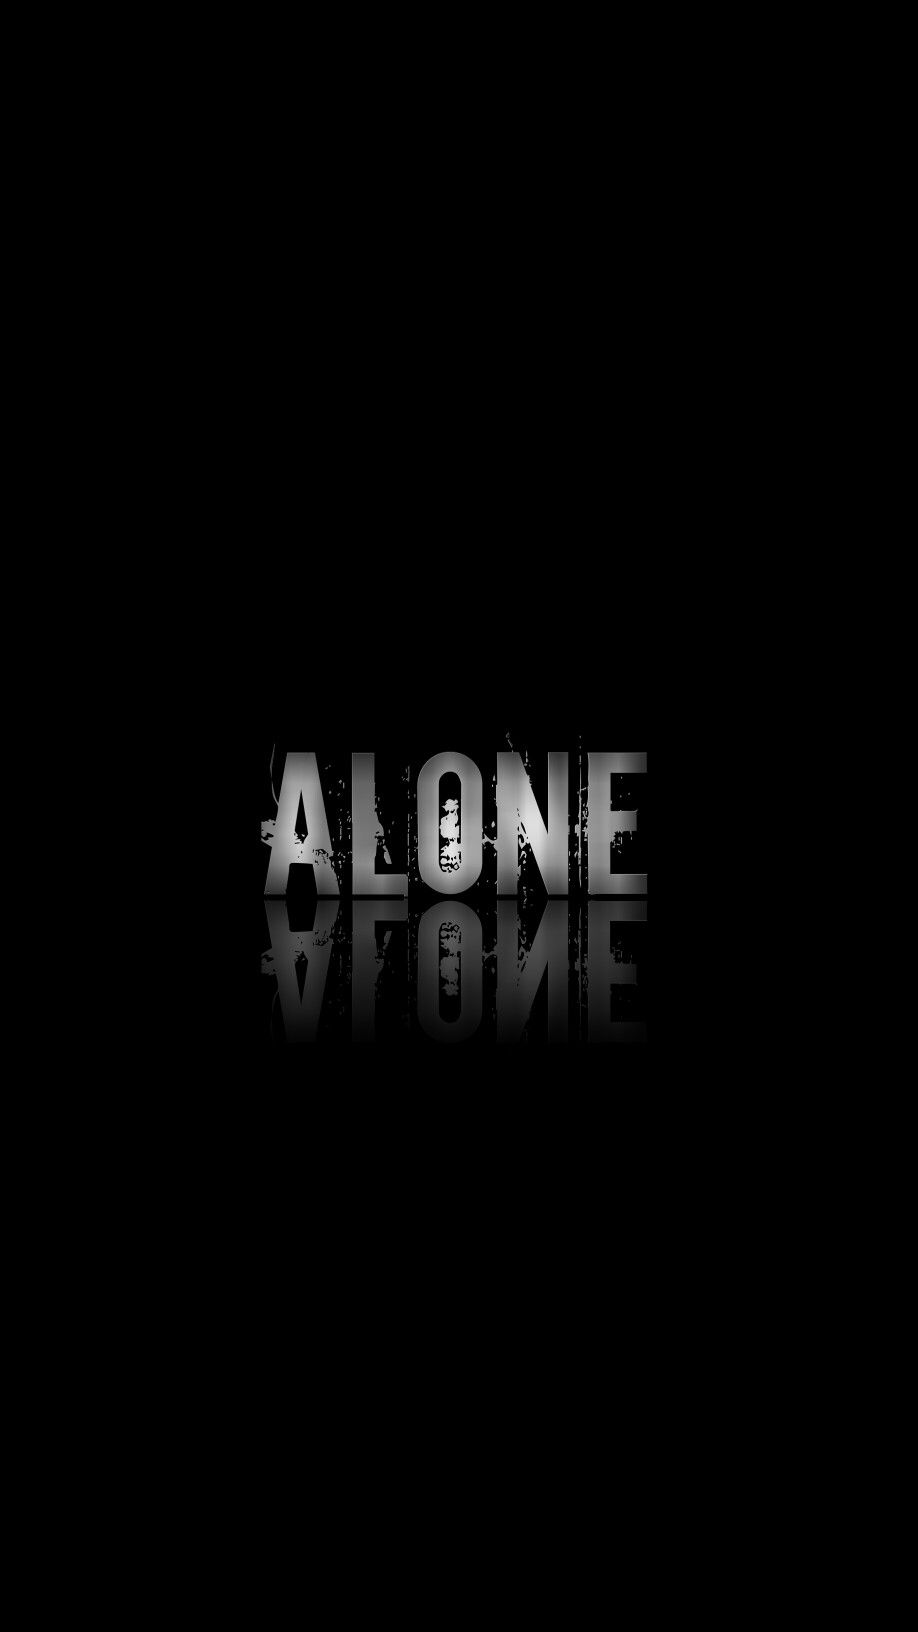 Alone Text Wallpapers - Wallpaper Cave